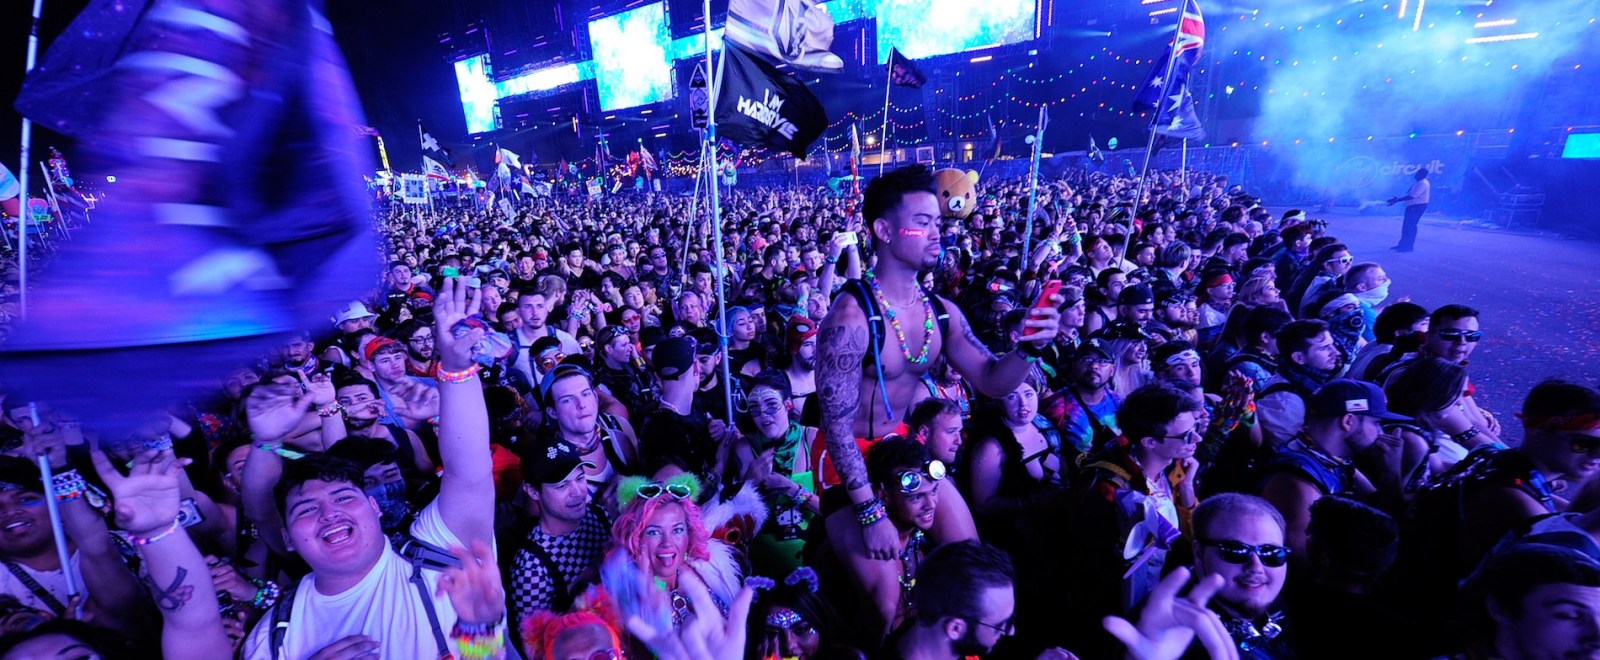 music-festival-concert-crowd-audience-electric-daisy-carnival-edc-getty-full.jpg